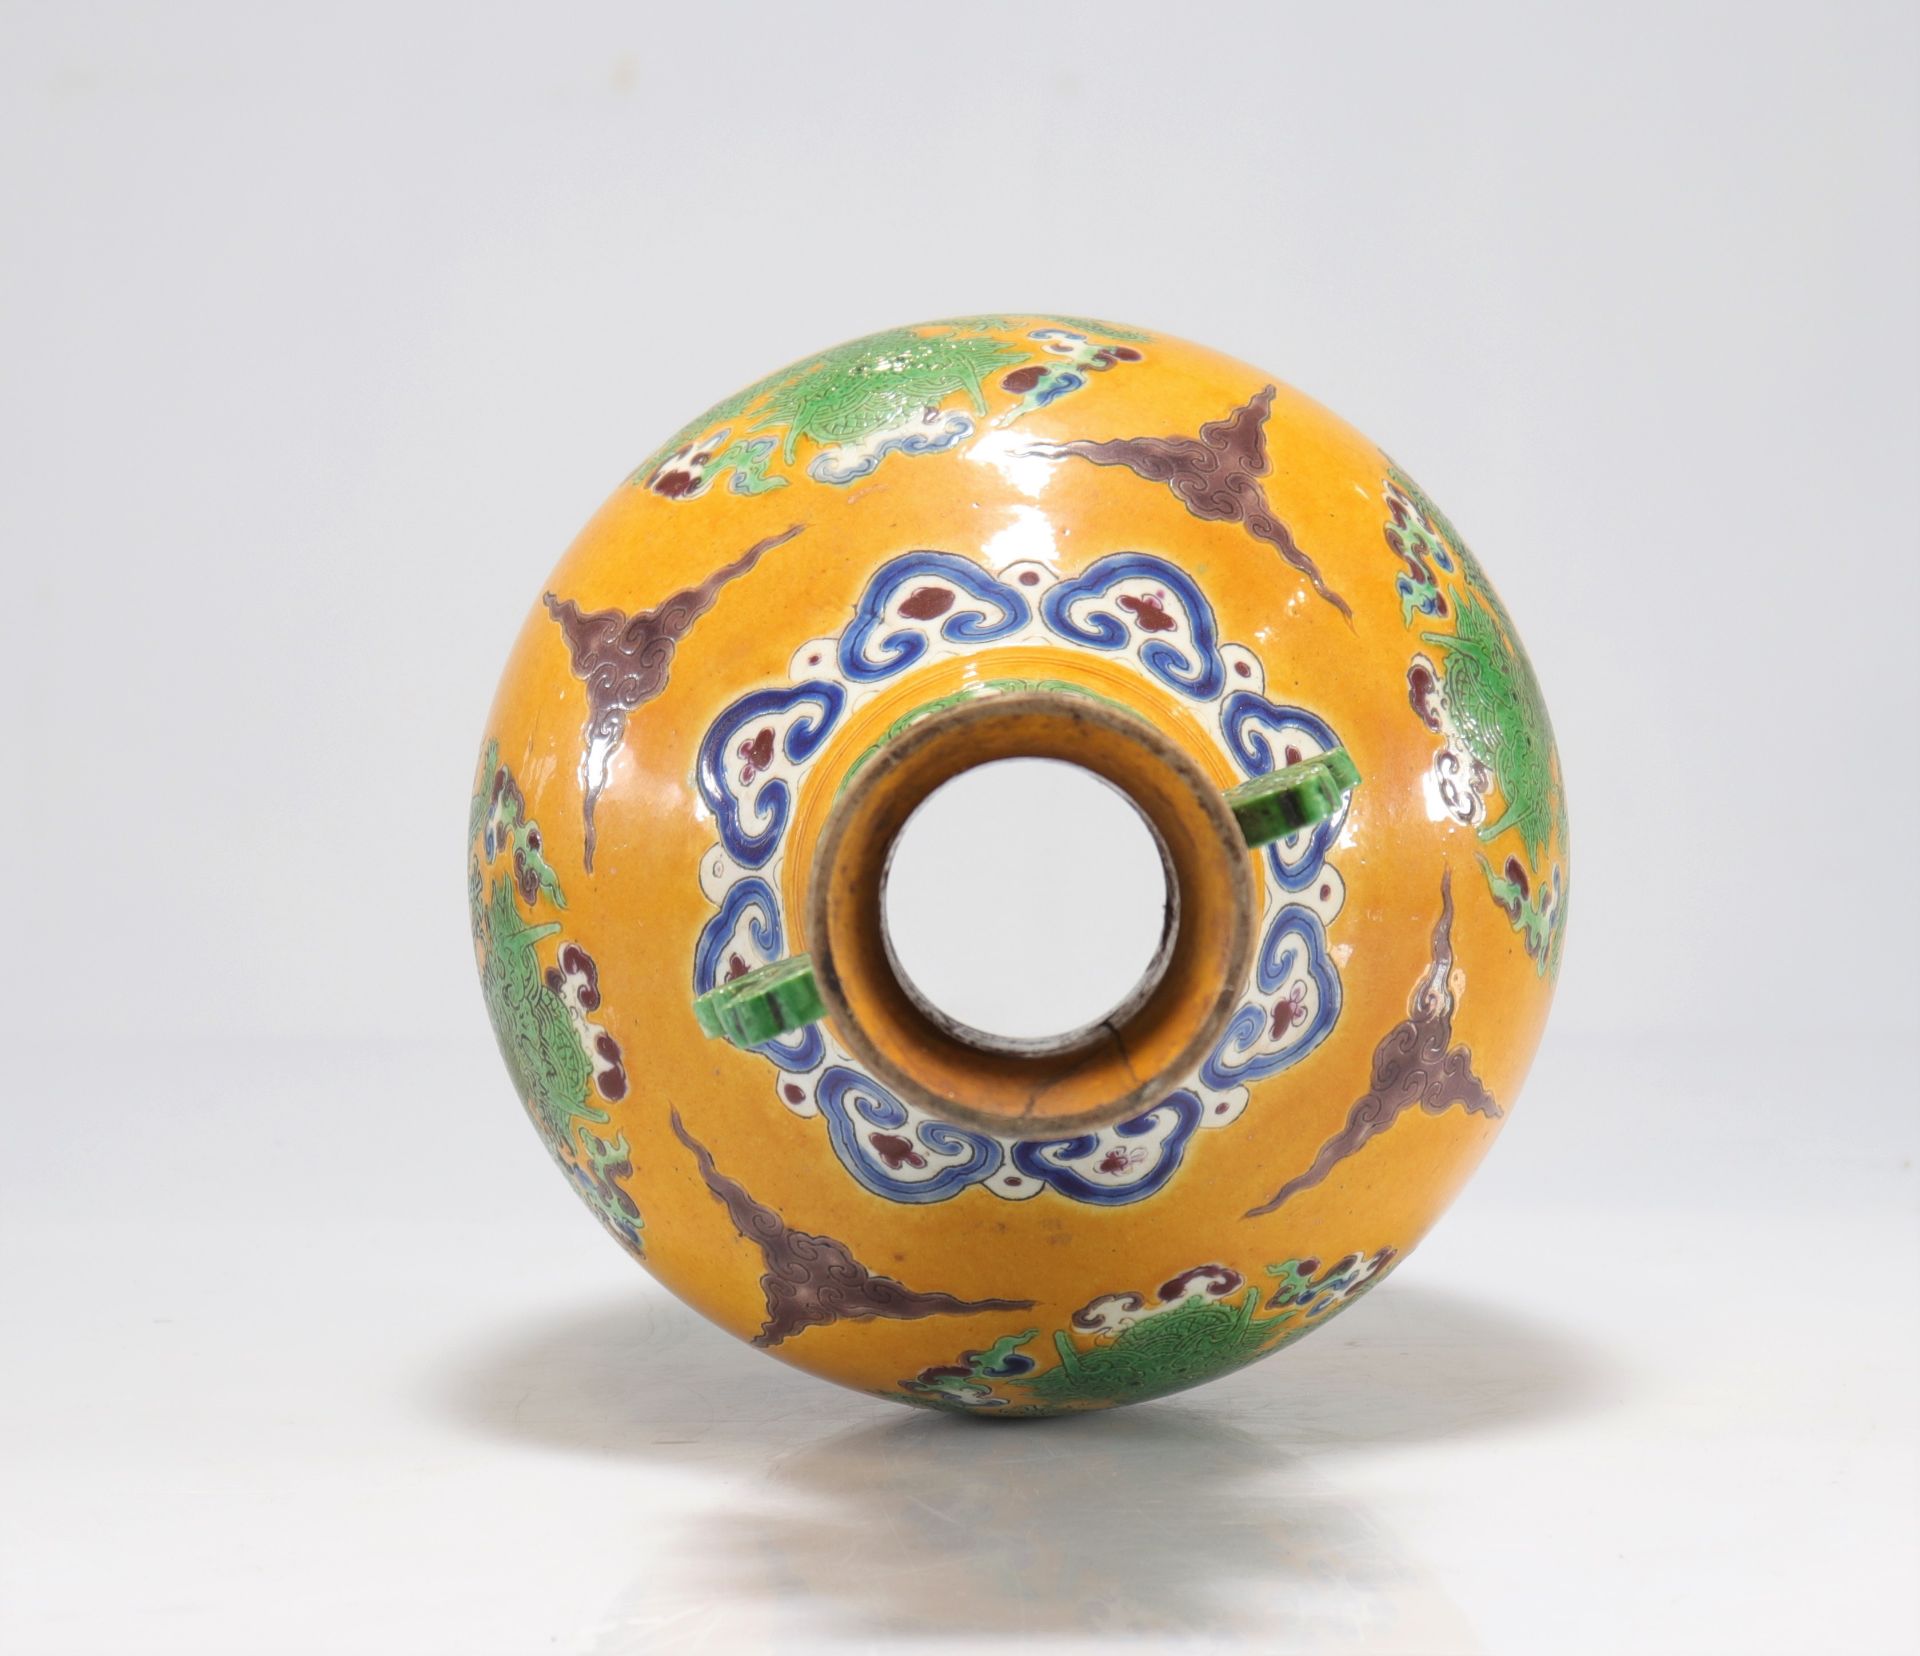 Glazed sandstone vase with yellow background decorated with imperial dragons - Image 6 of 6